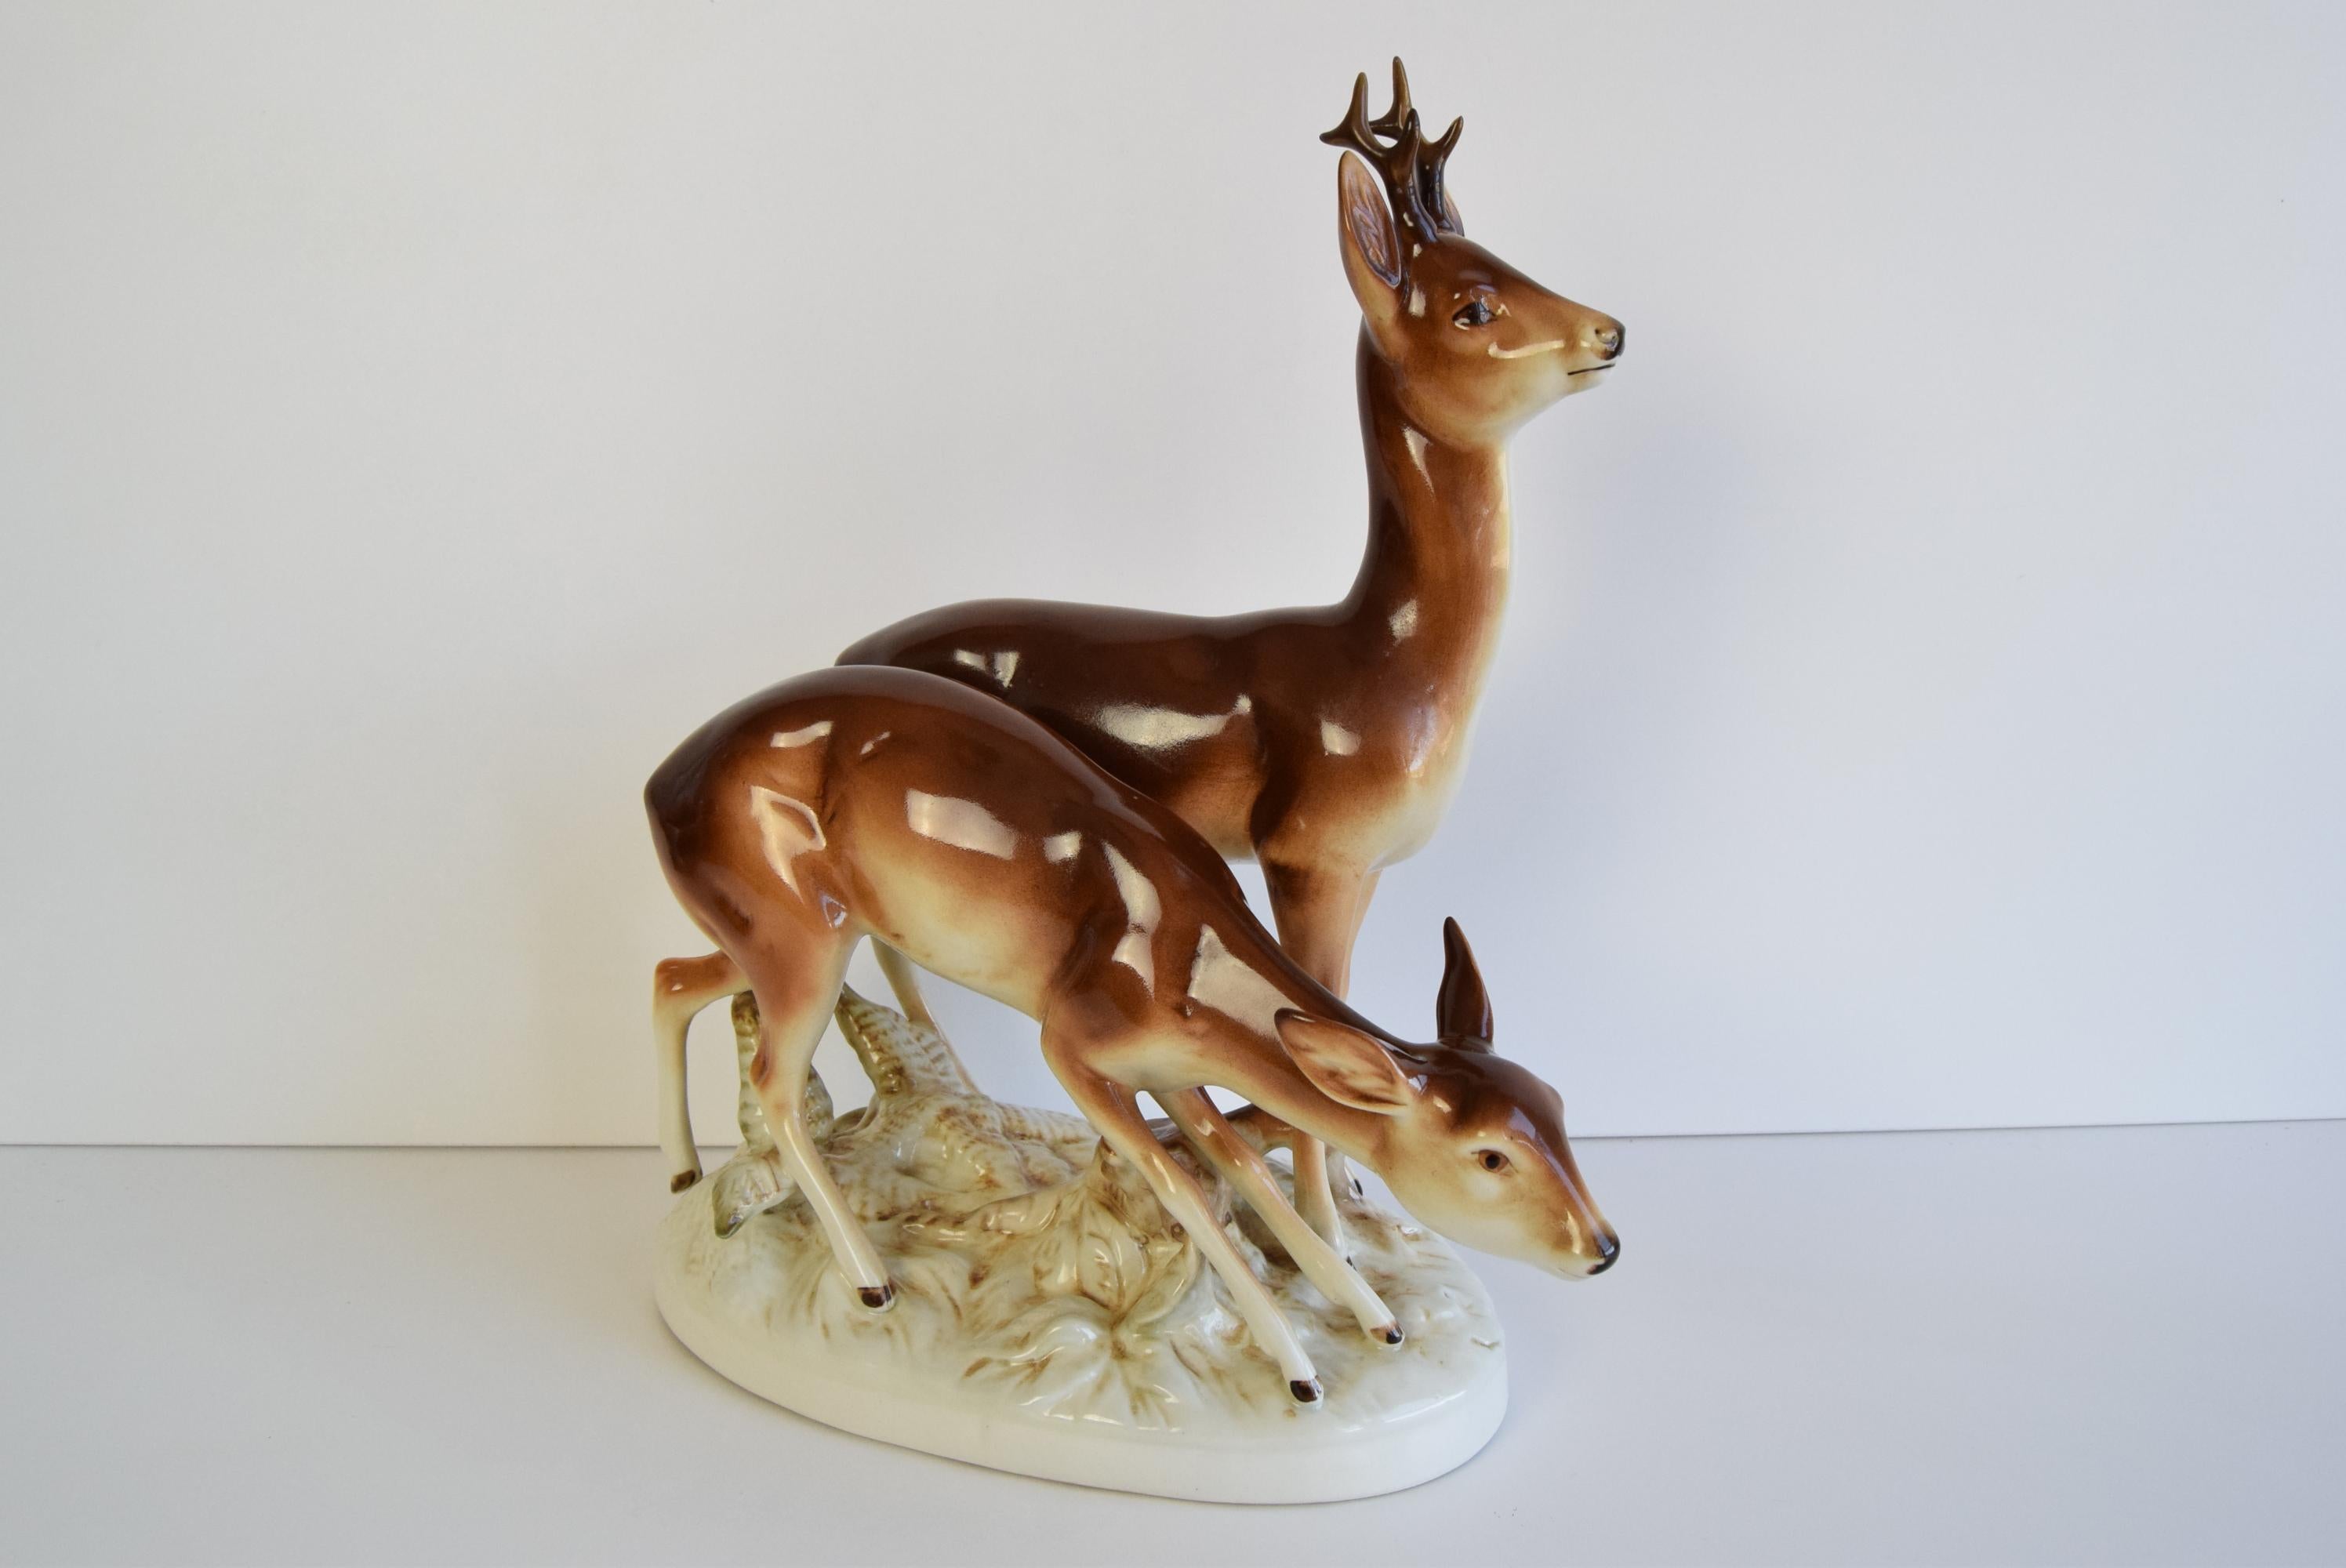 
Made in Czechoslovakia
Made of Porcelain
 The roe deer has a chipped antler(see photo)
Original Vintage Condition